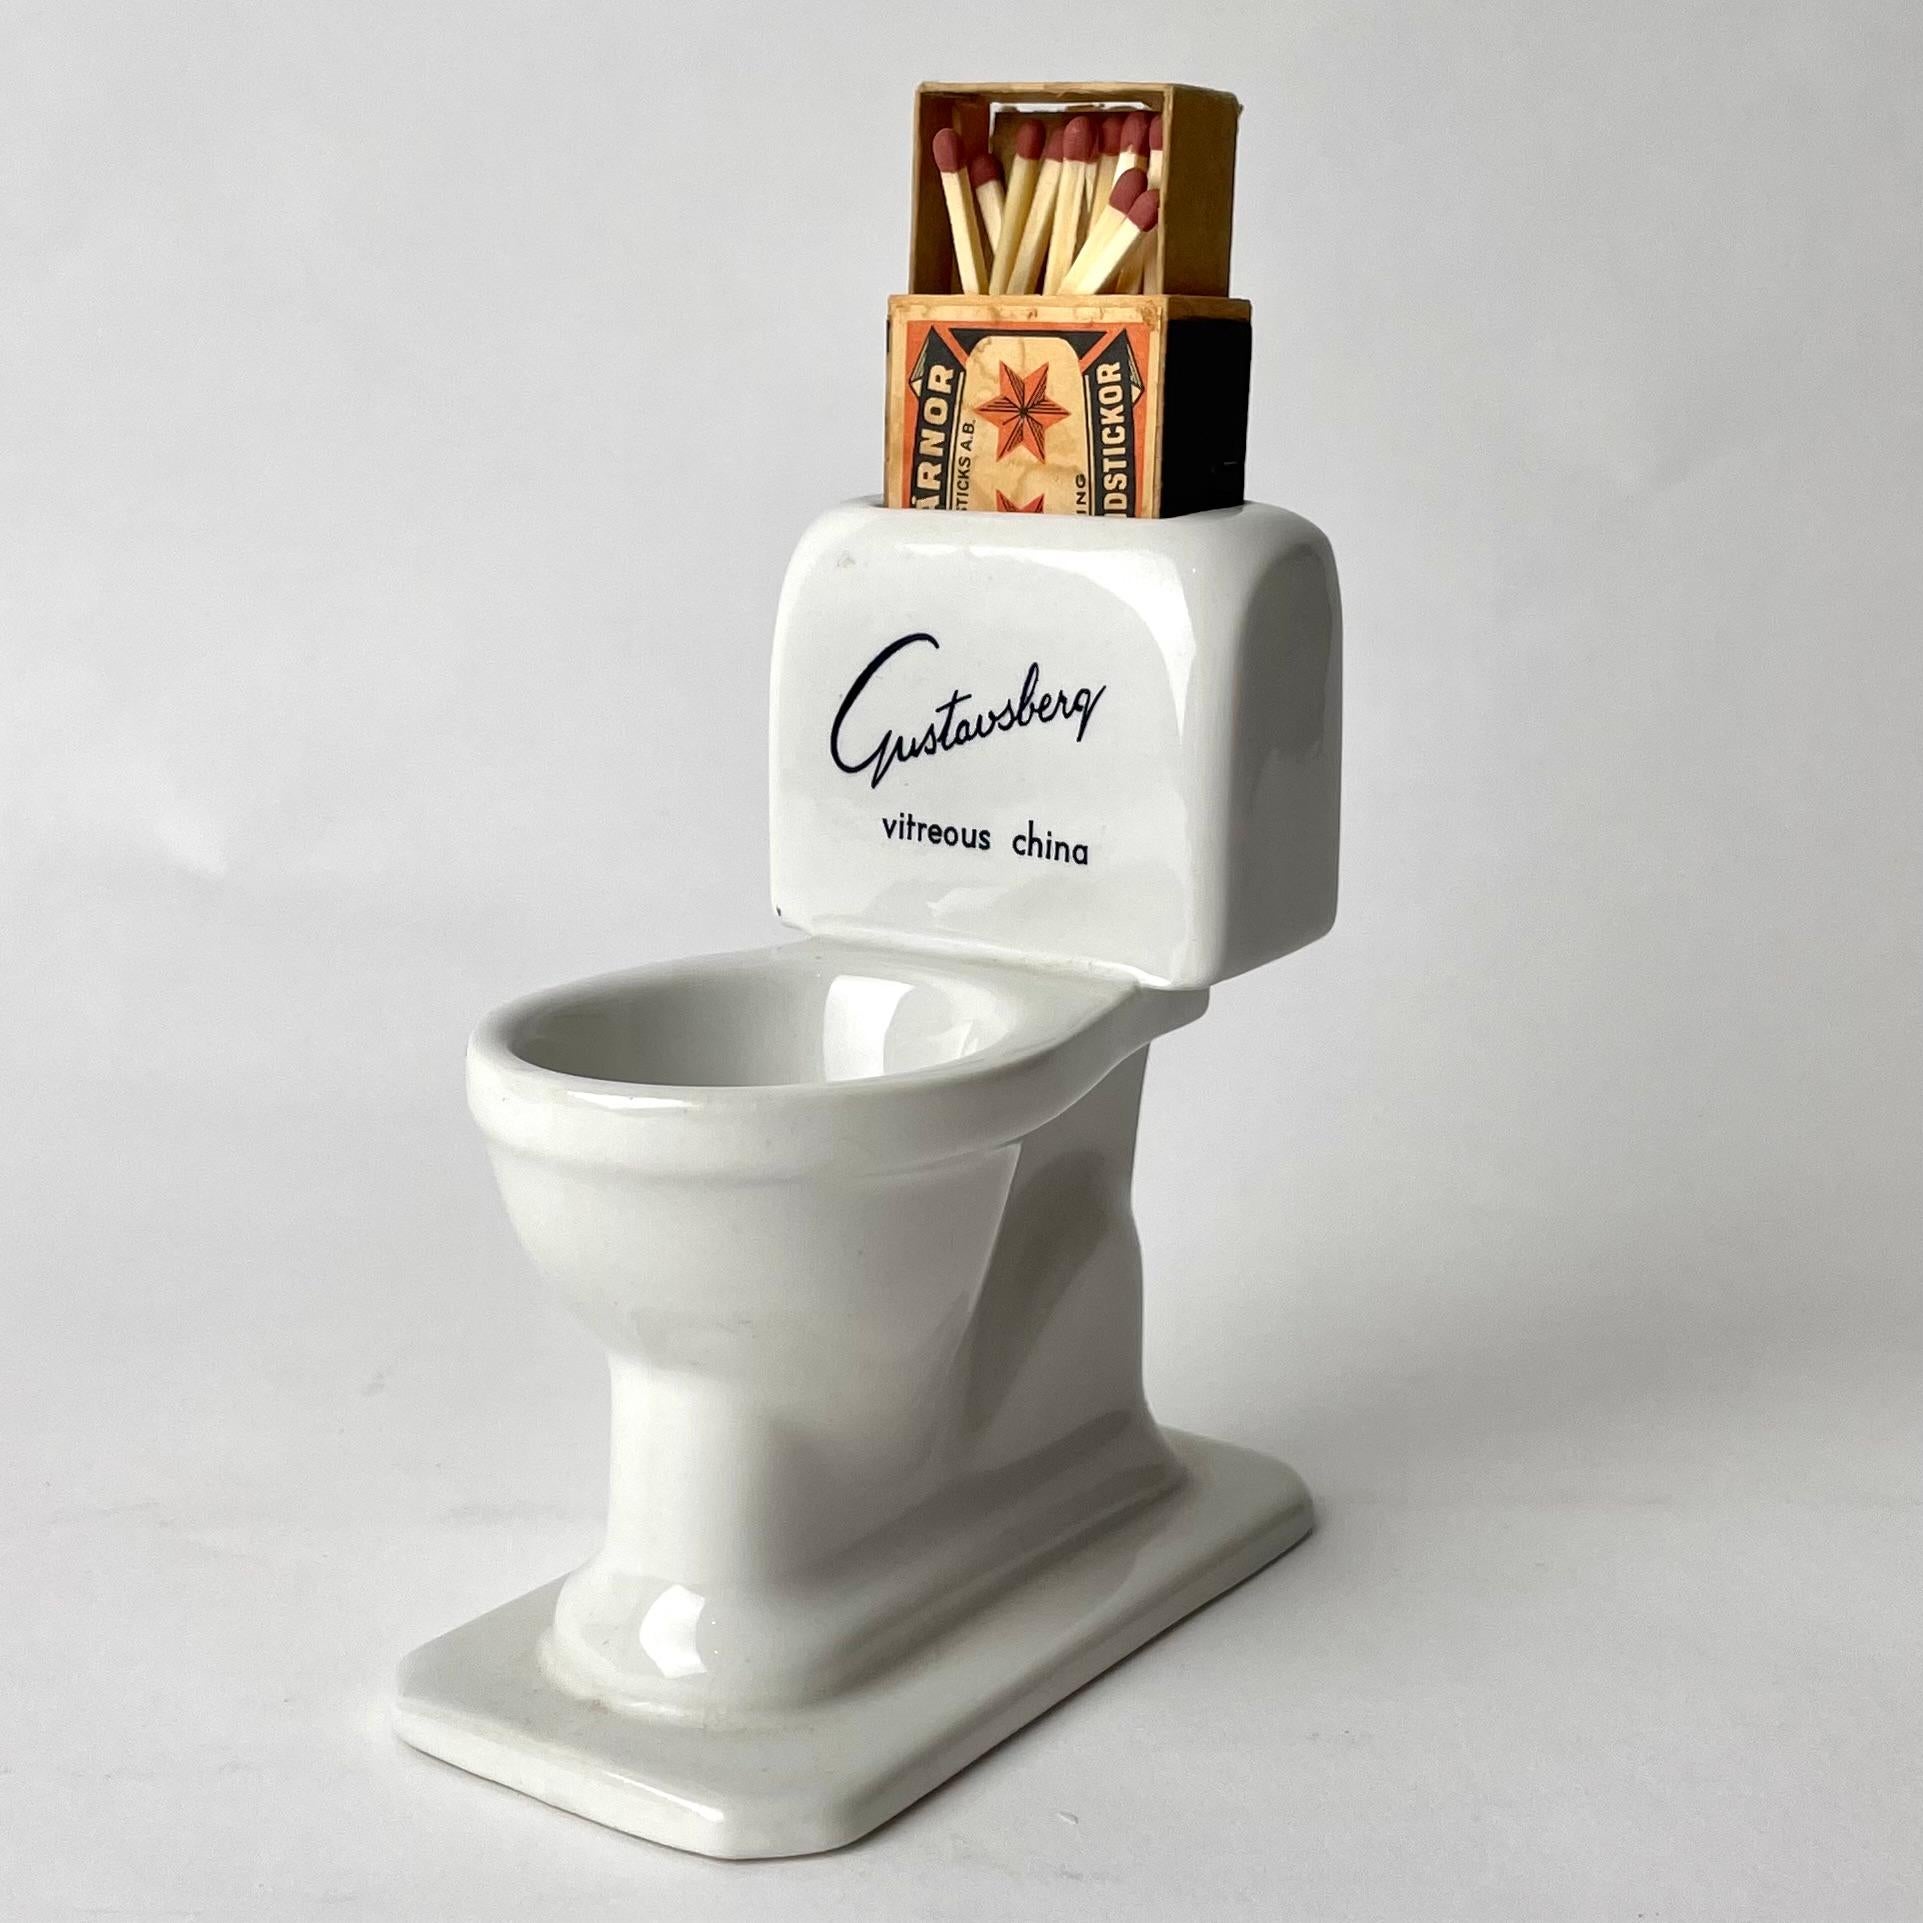 Very Charming and Fun Match Holder in the form of a toilet seat from mid-20th Century. Made by the famous porcelain manufacturer Gustavsberg, Sweden as a promotional gift for toilet seats

Wear consistent with age and use 